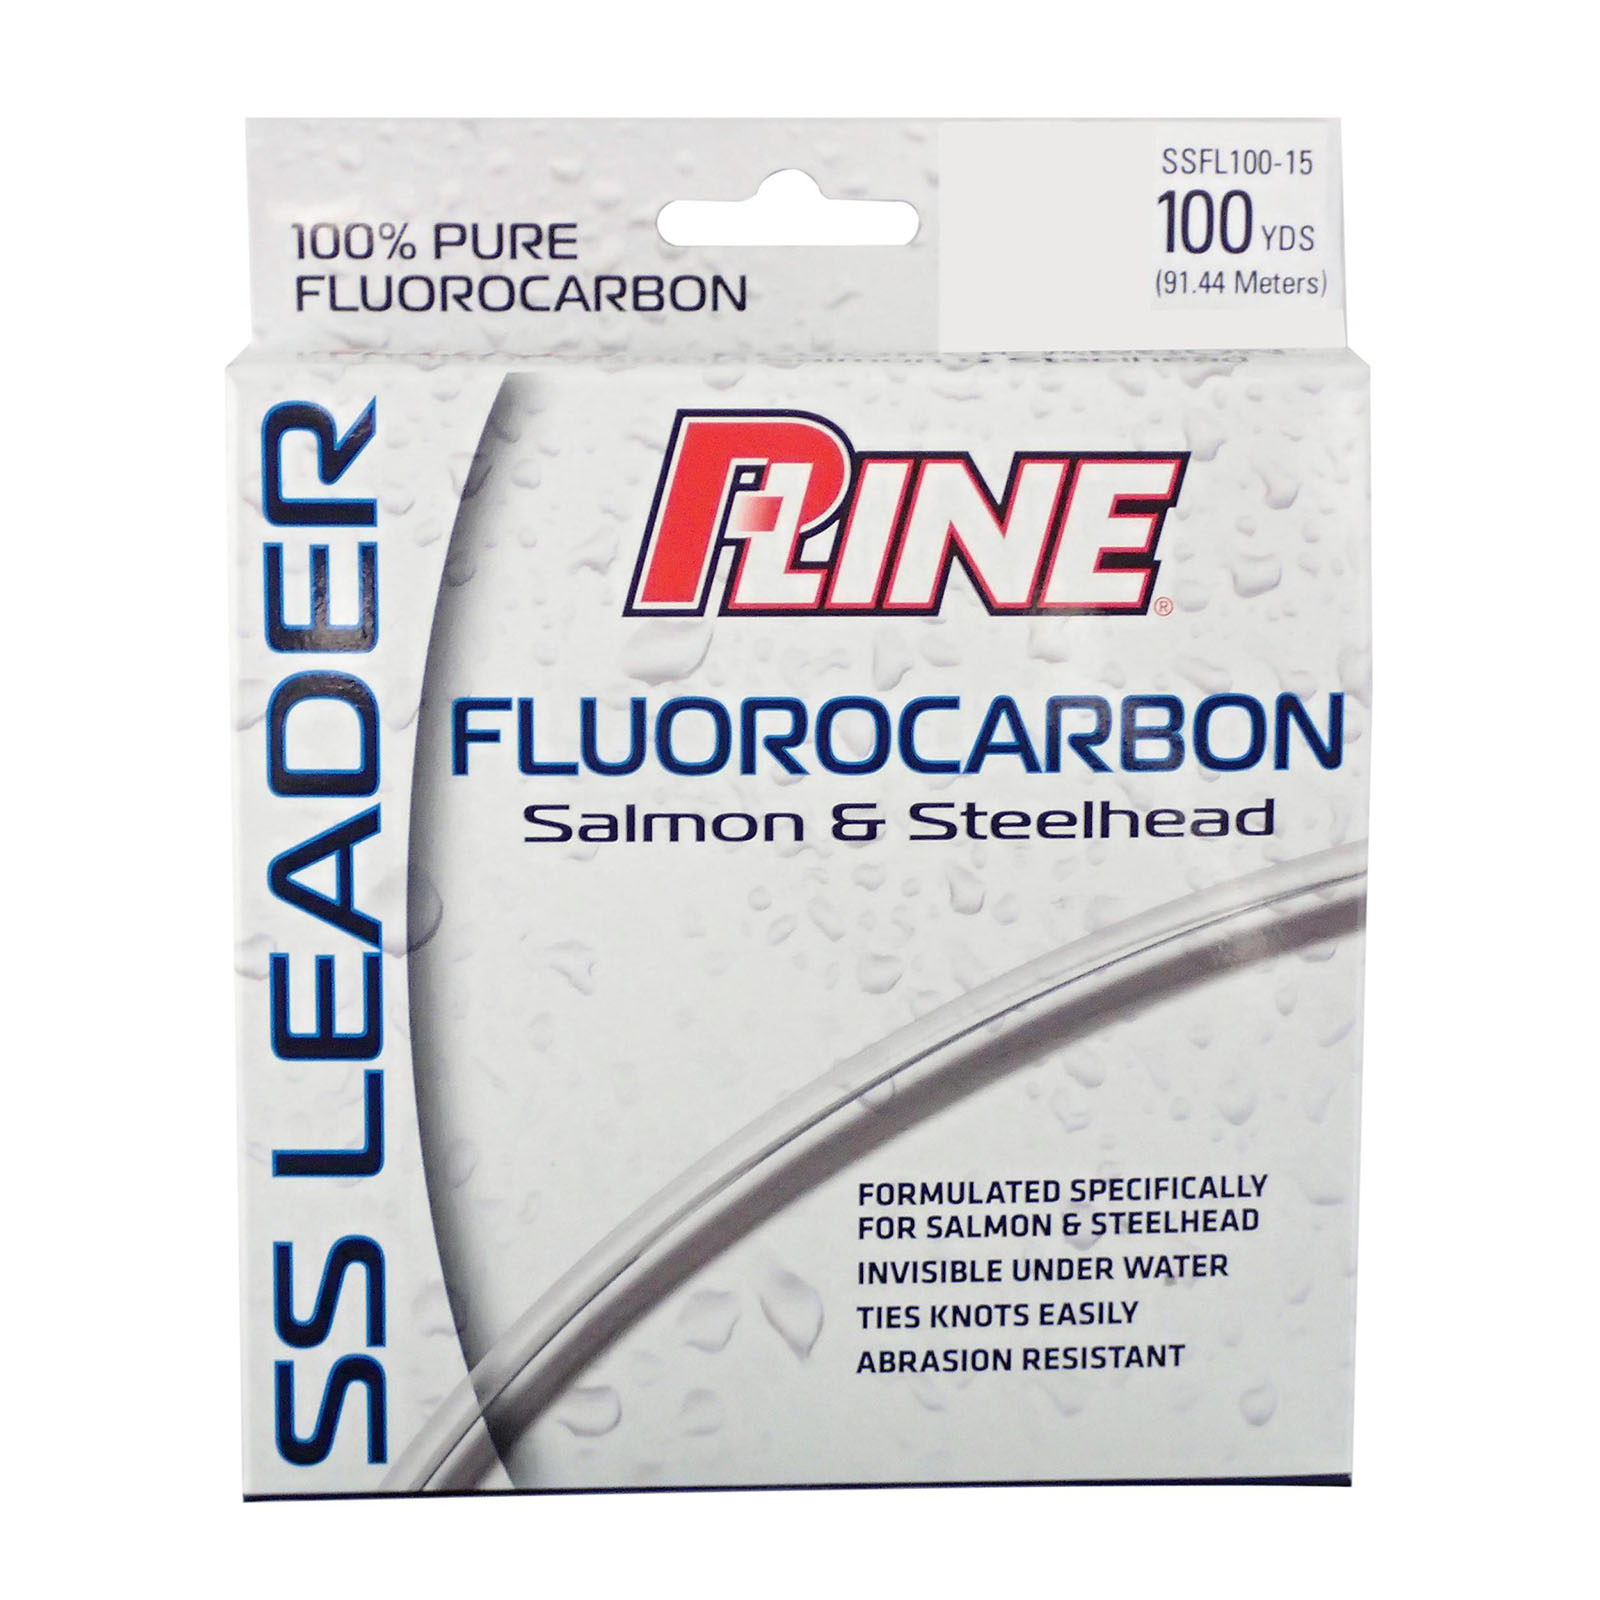 P-Line Tactical Fluorocarbon Fishing Line Review!, The BEST Fluorocarbon  Ever?!